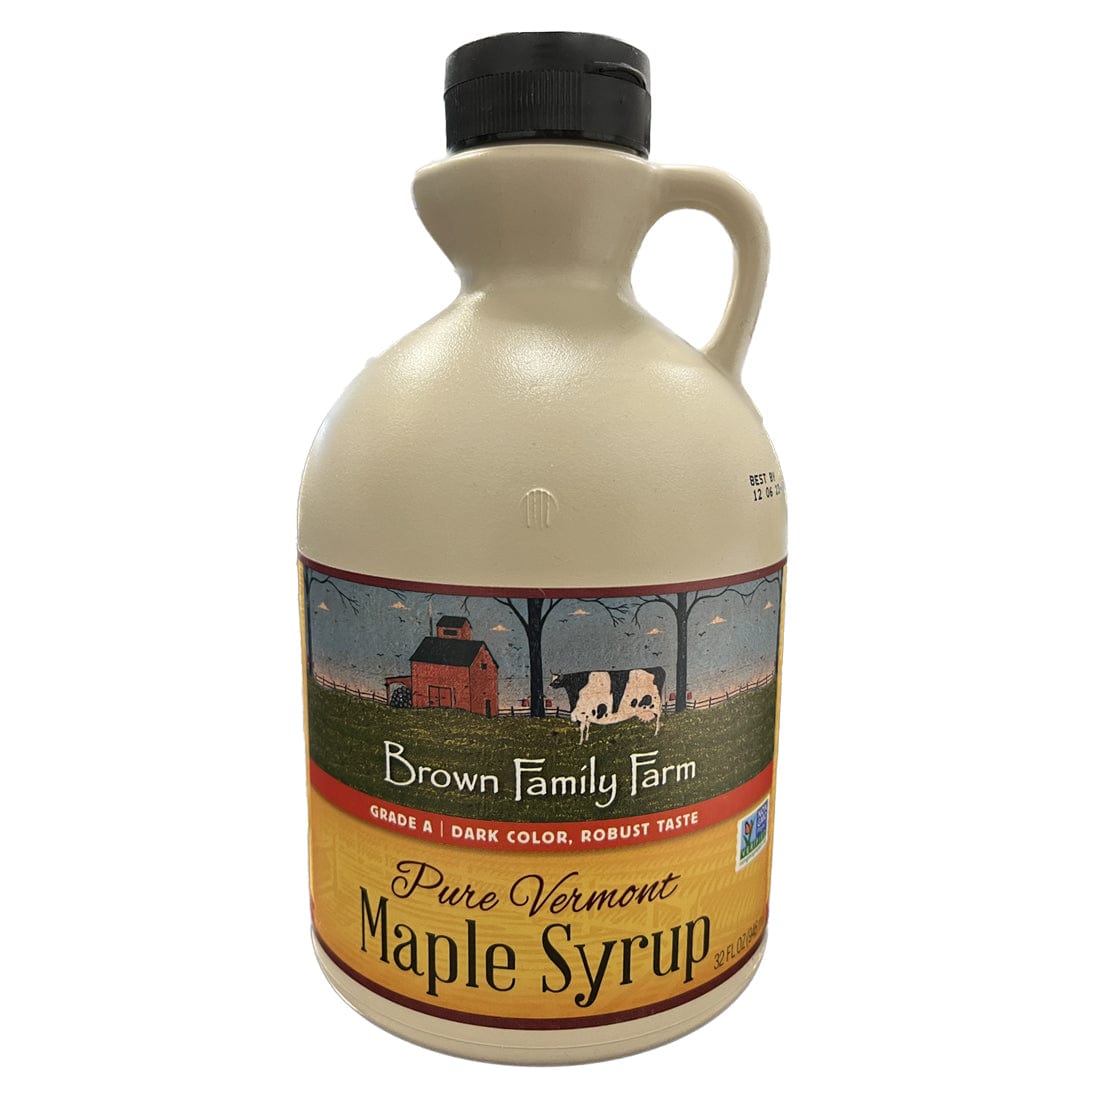 Coombs Family Farms Brown Family Farms Maple Syrup 32oz Grade A Dark Amber